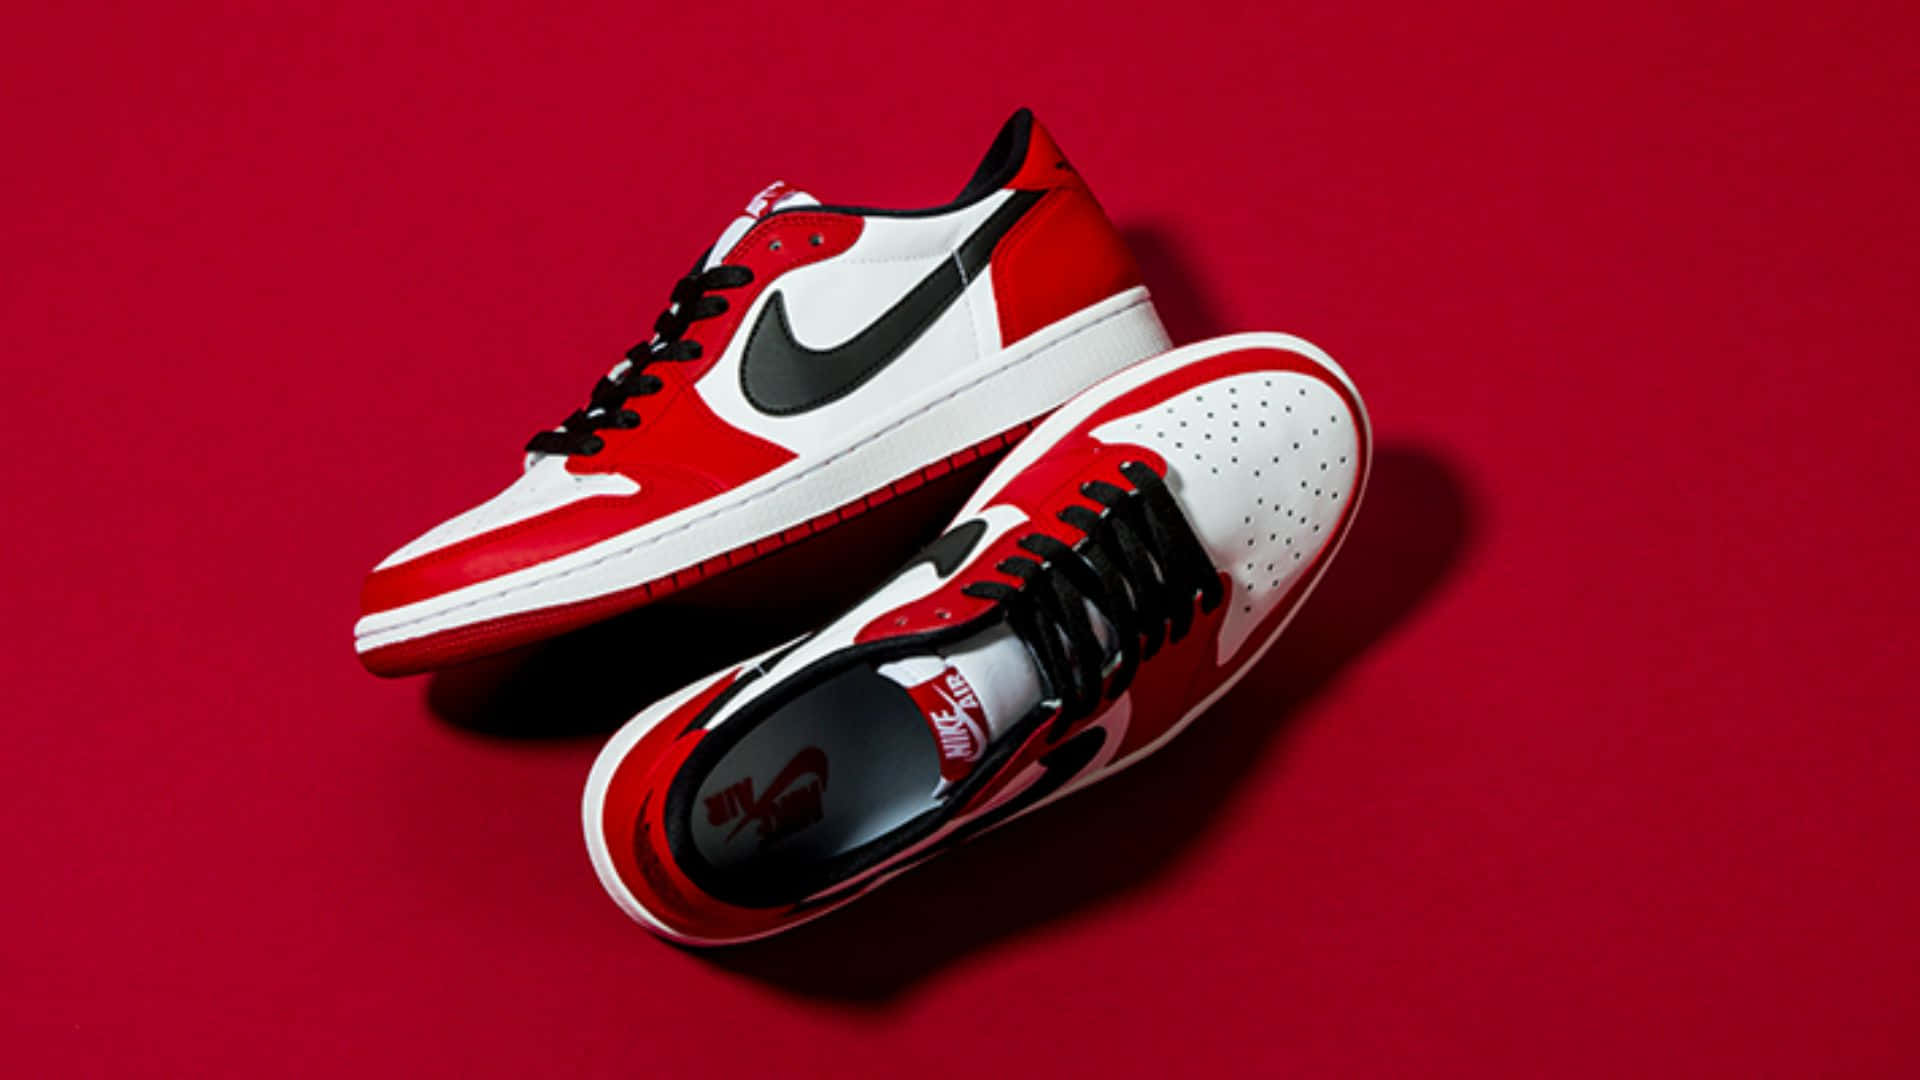 Red Air Jordan shoes for athletes and sneaker fans. Wallpaper